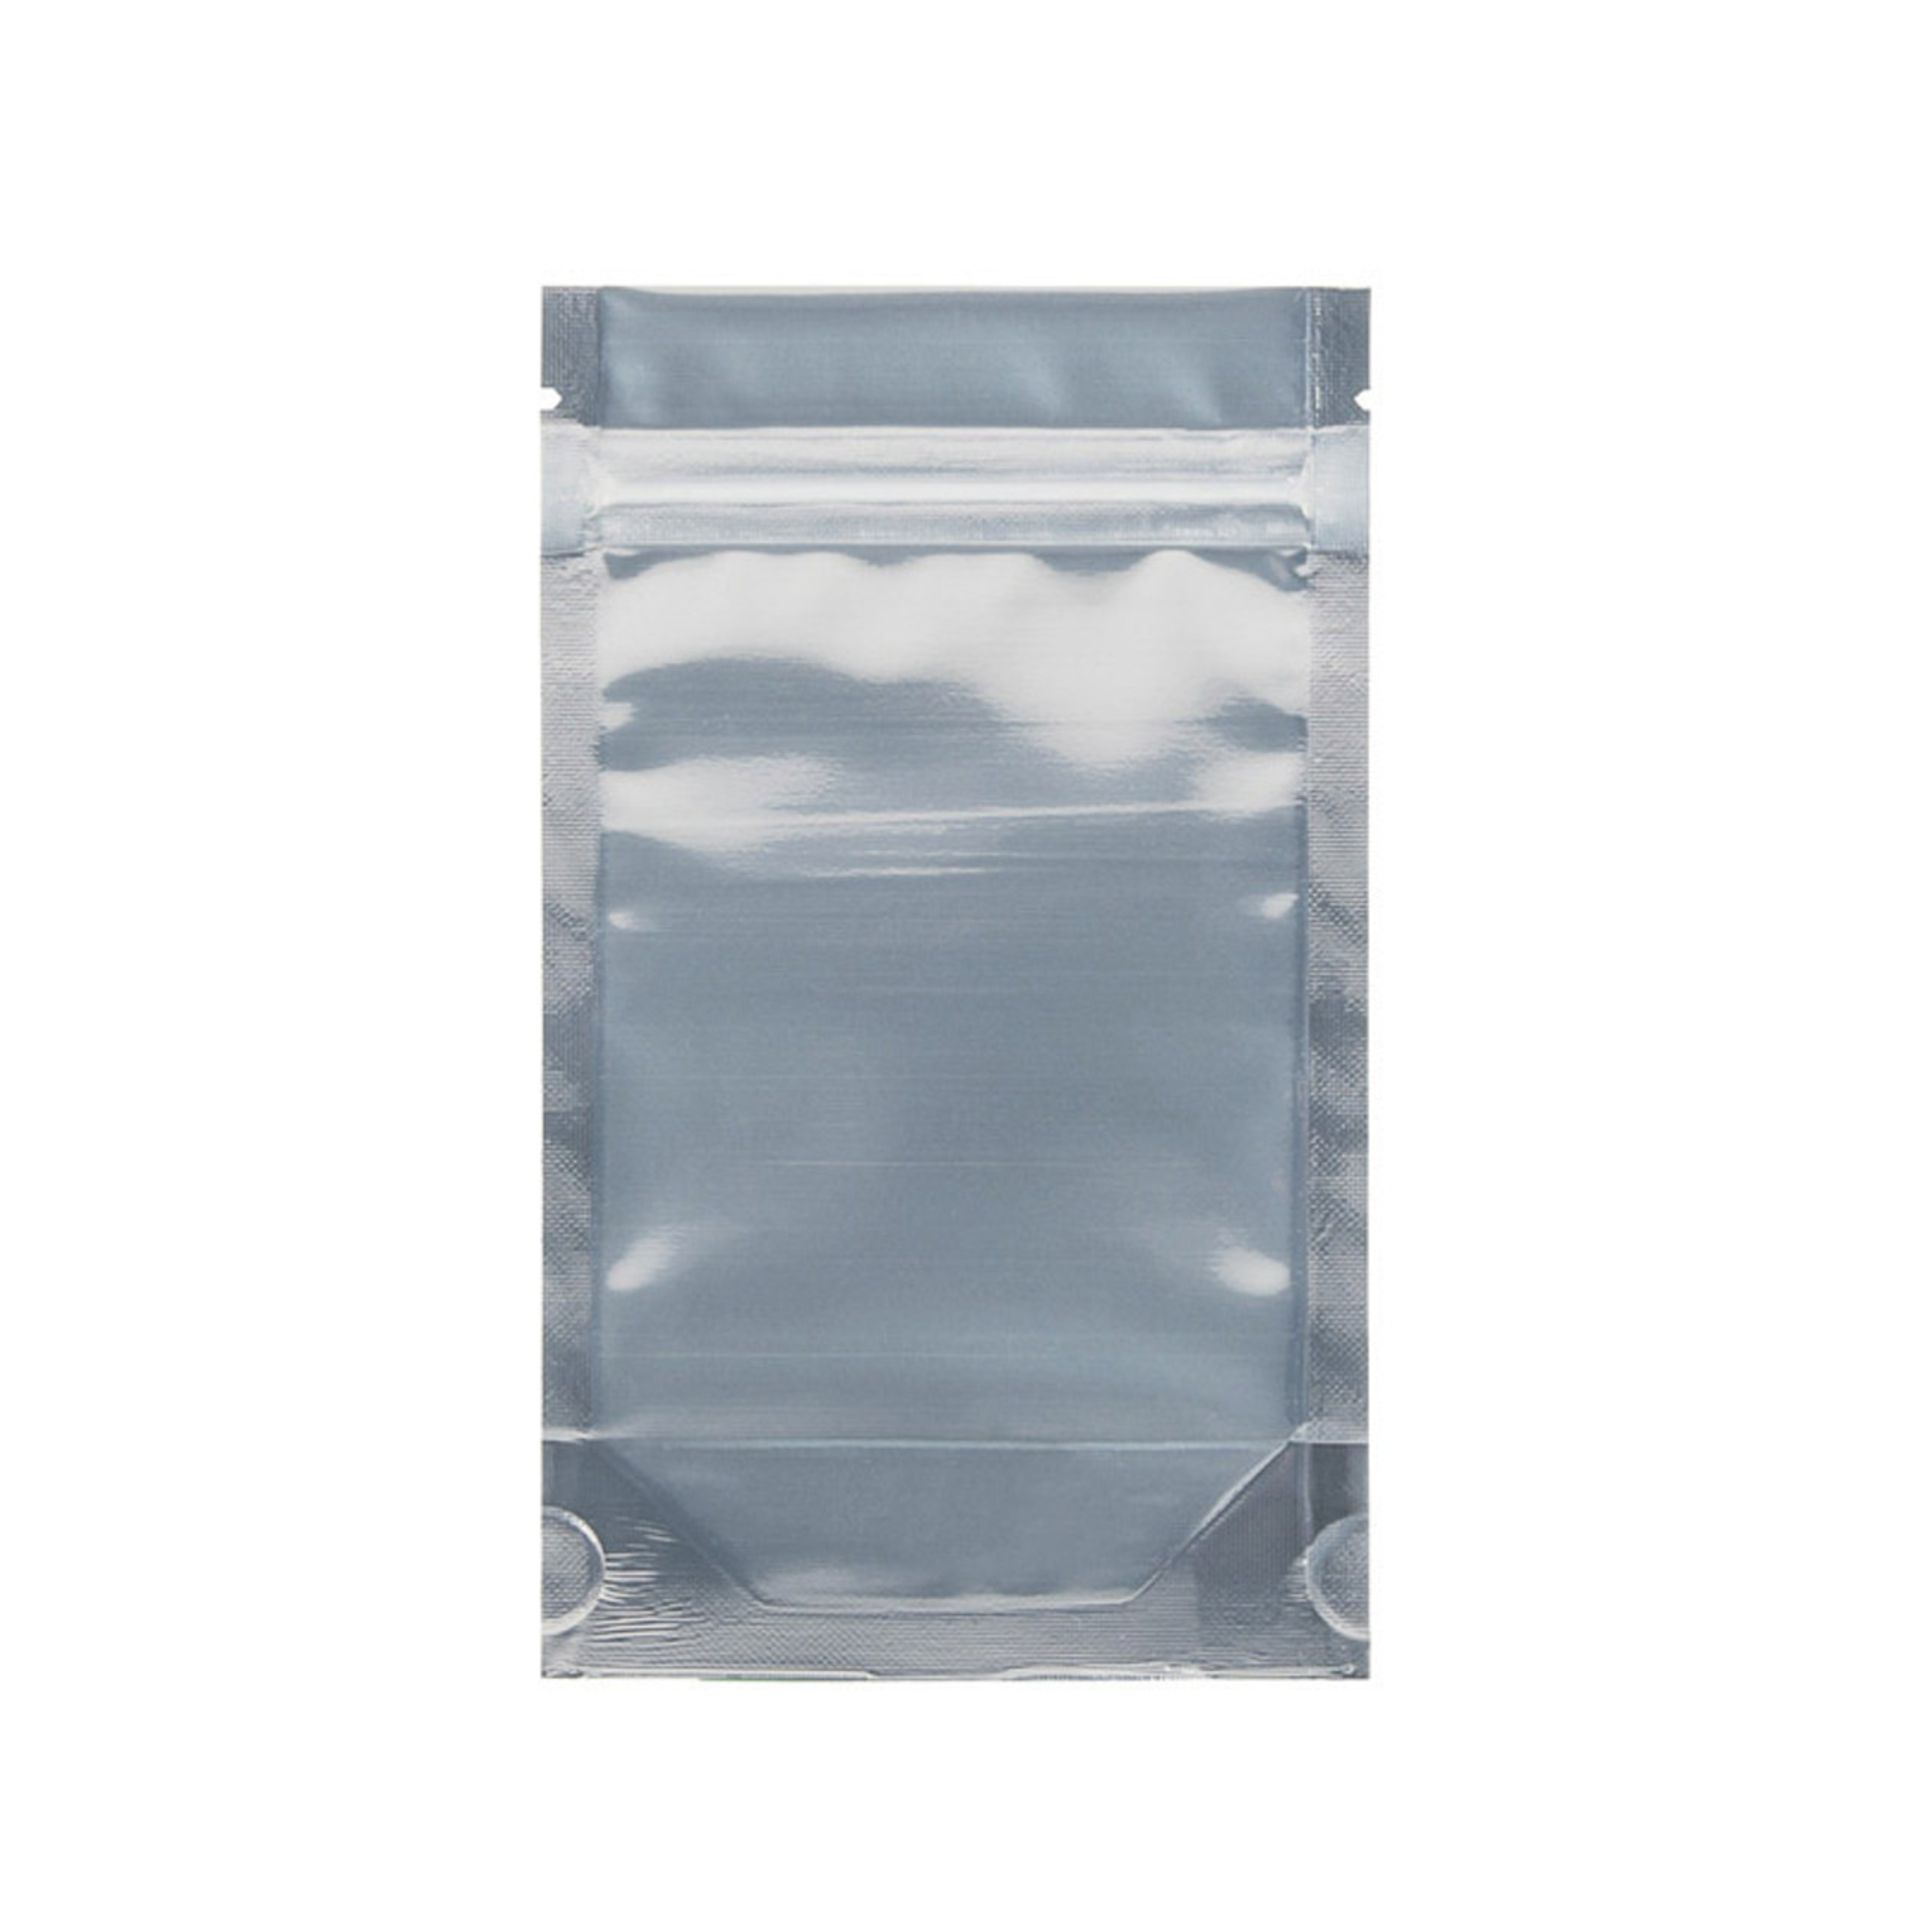 (Located in Moreno Valley, CA) 7g California Stamp Barrier Bags White/Clear, Qty 14,400 - Image 2 of 3